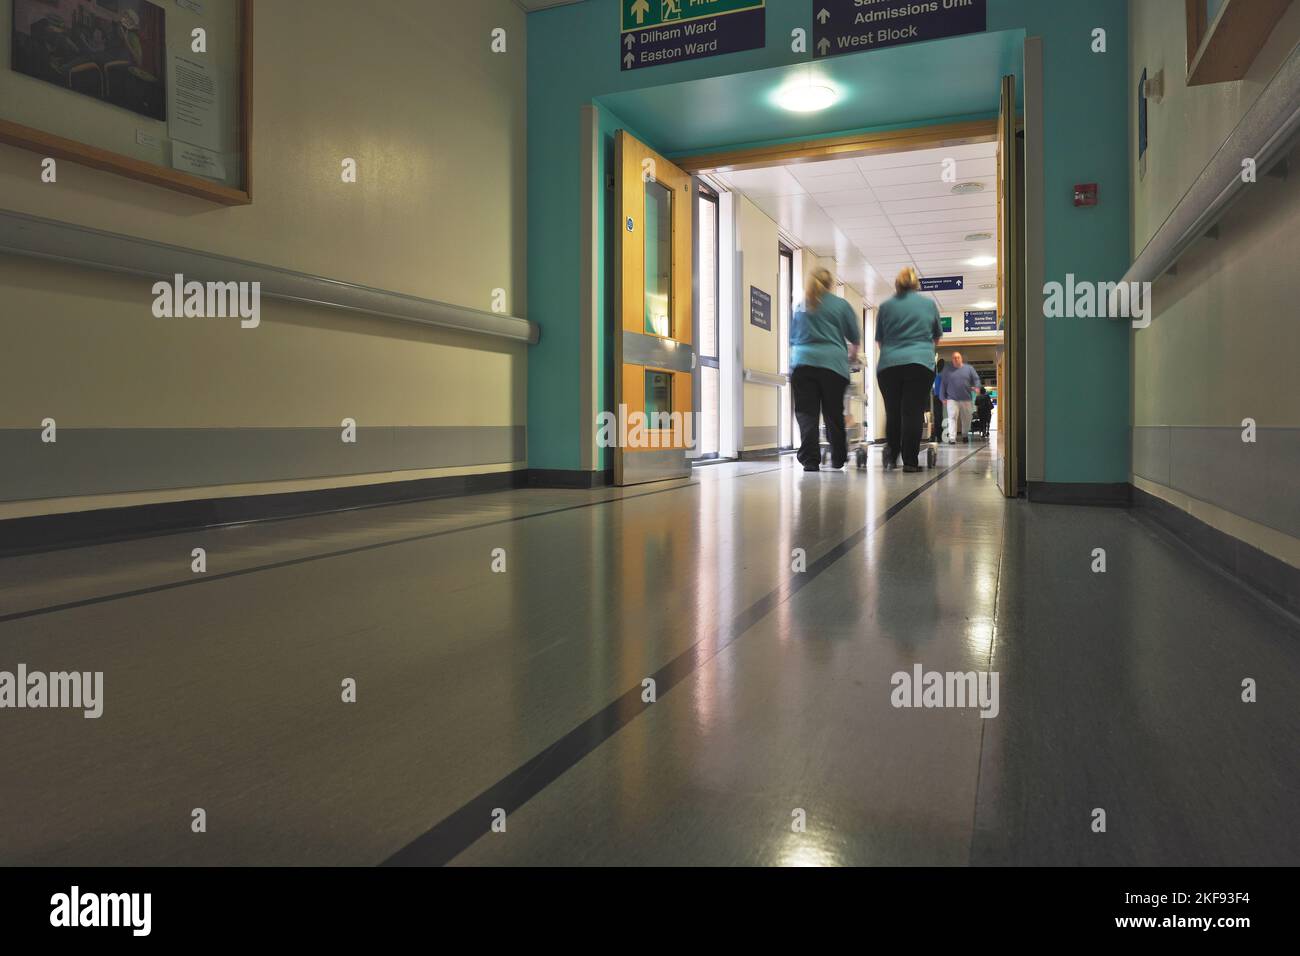 Two medical cleaning staff walk through a hospital corridor with equipment Stock Photo